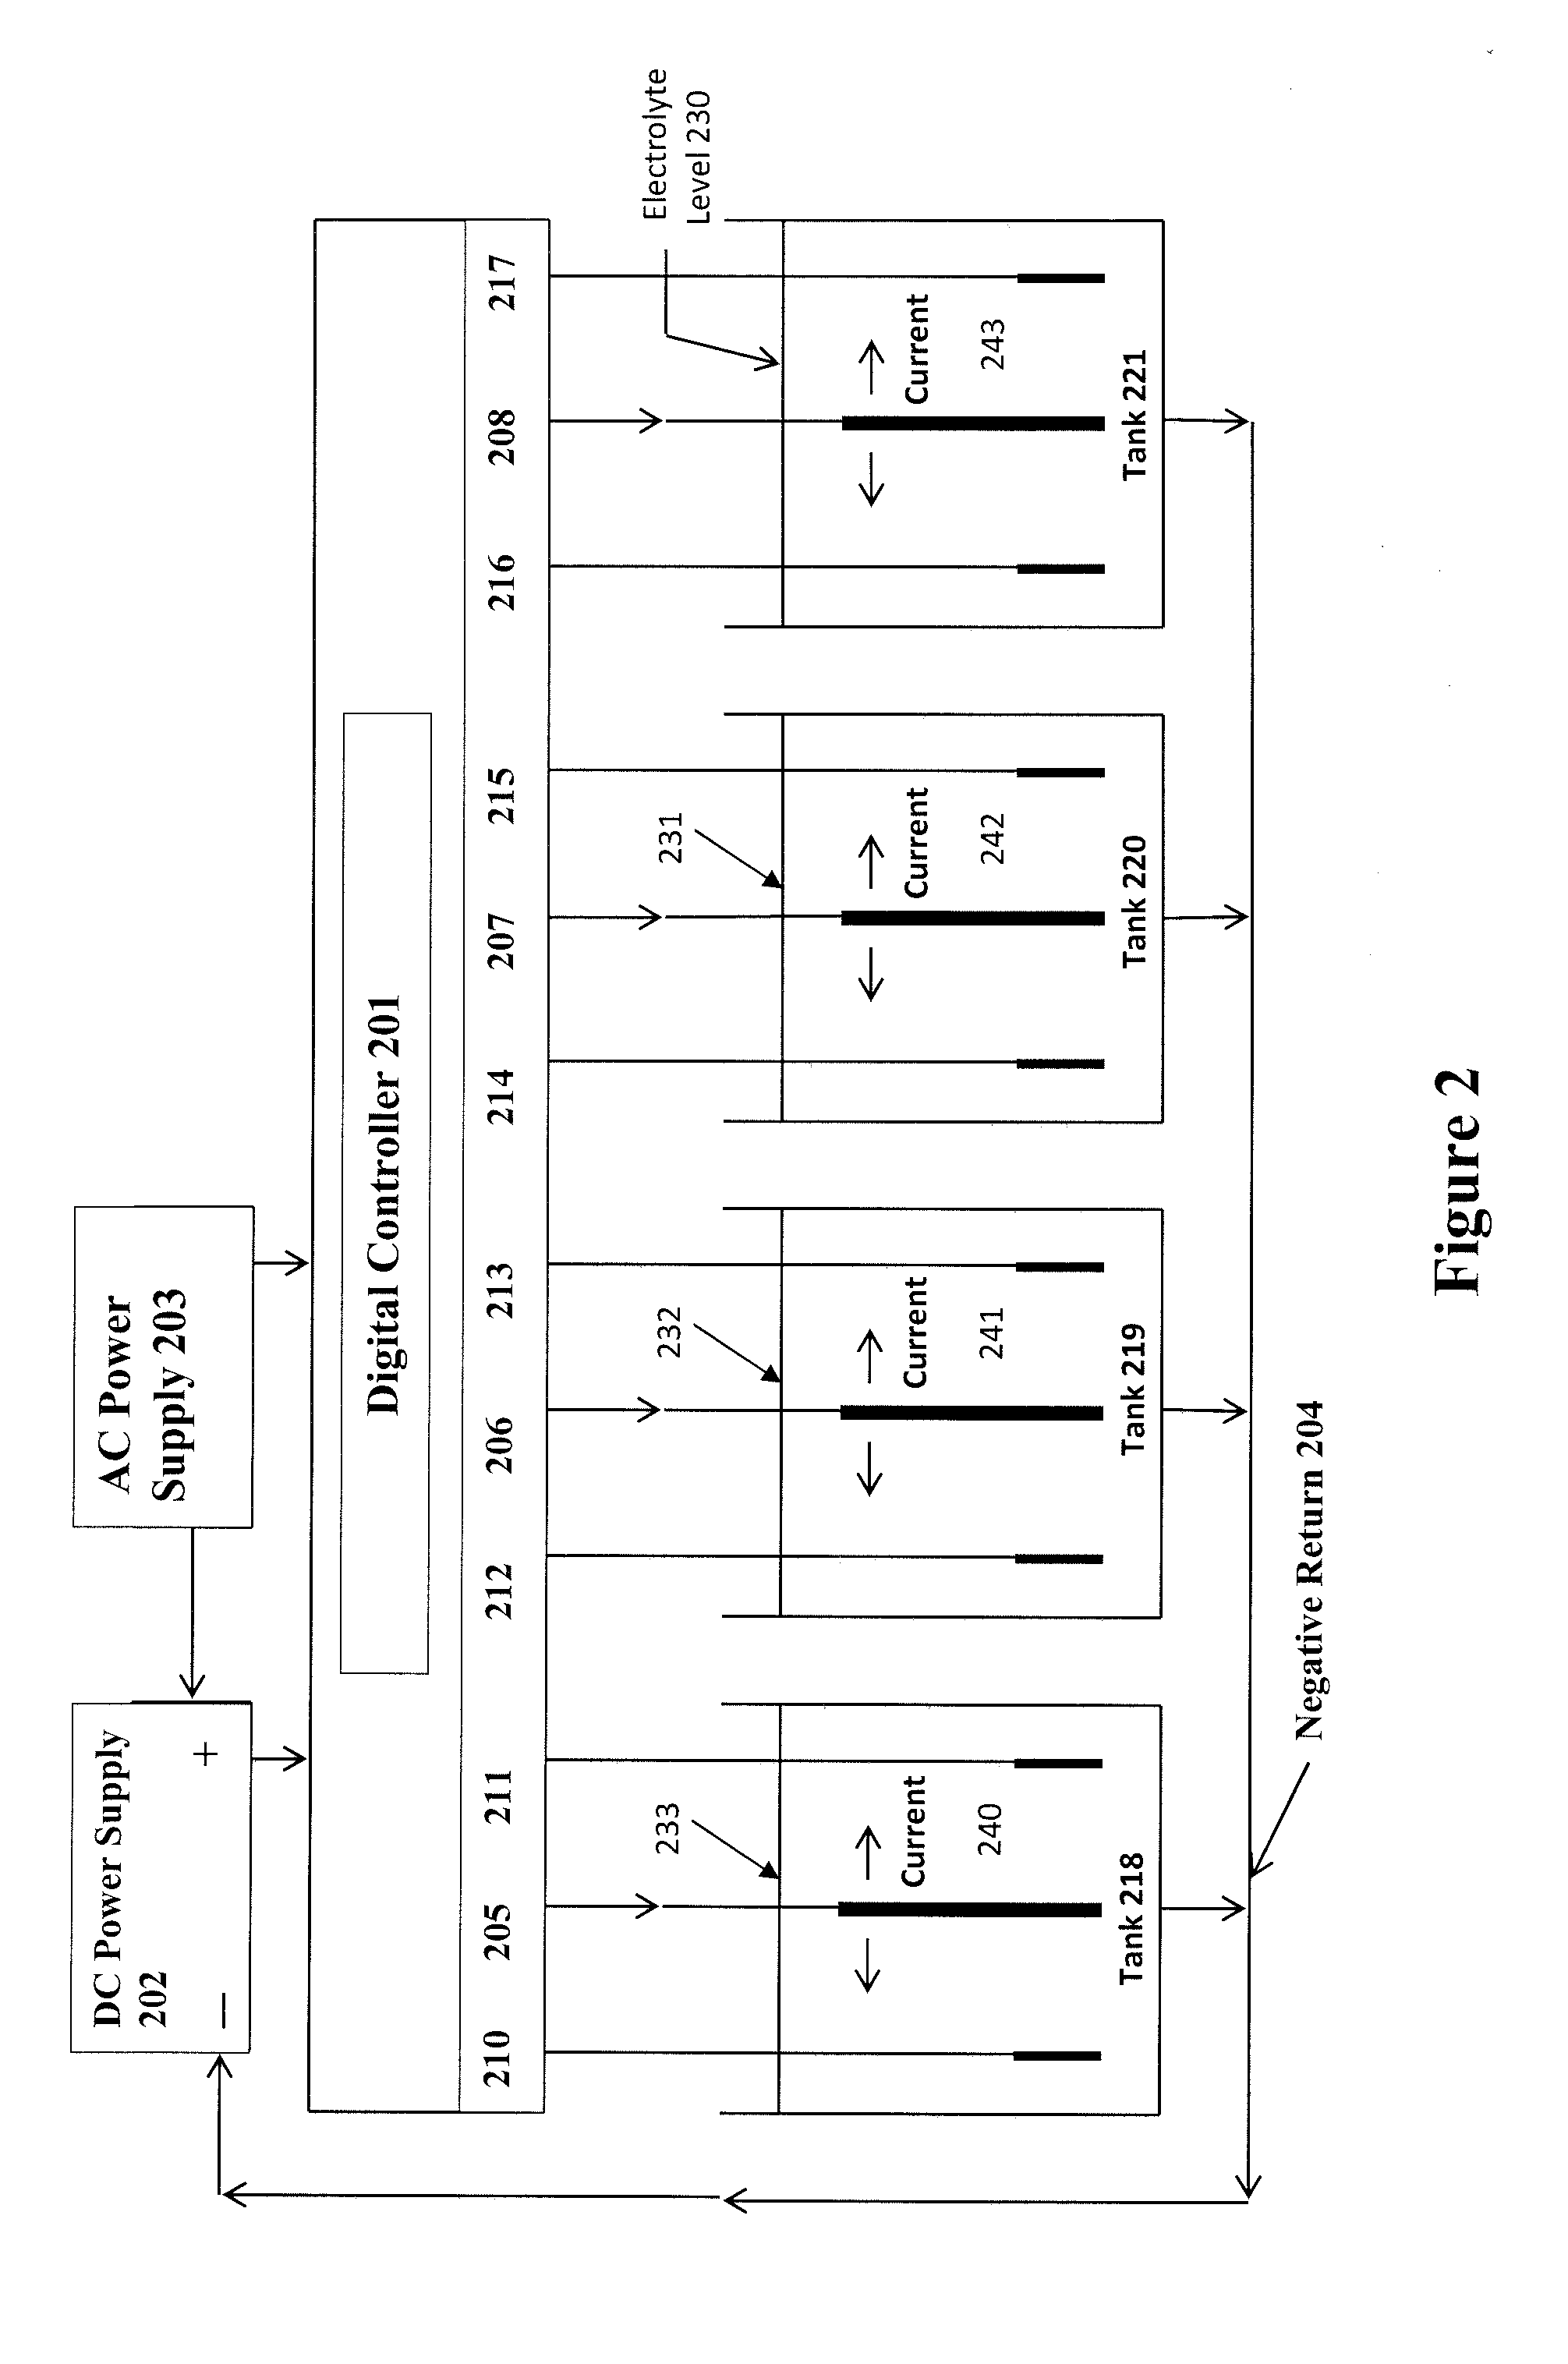 Digitally controlled corrosion protection system and method